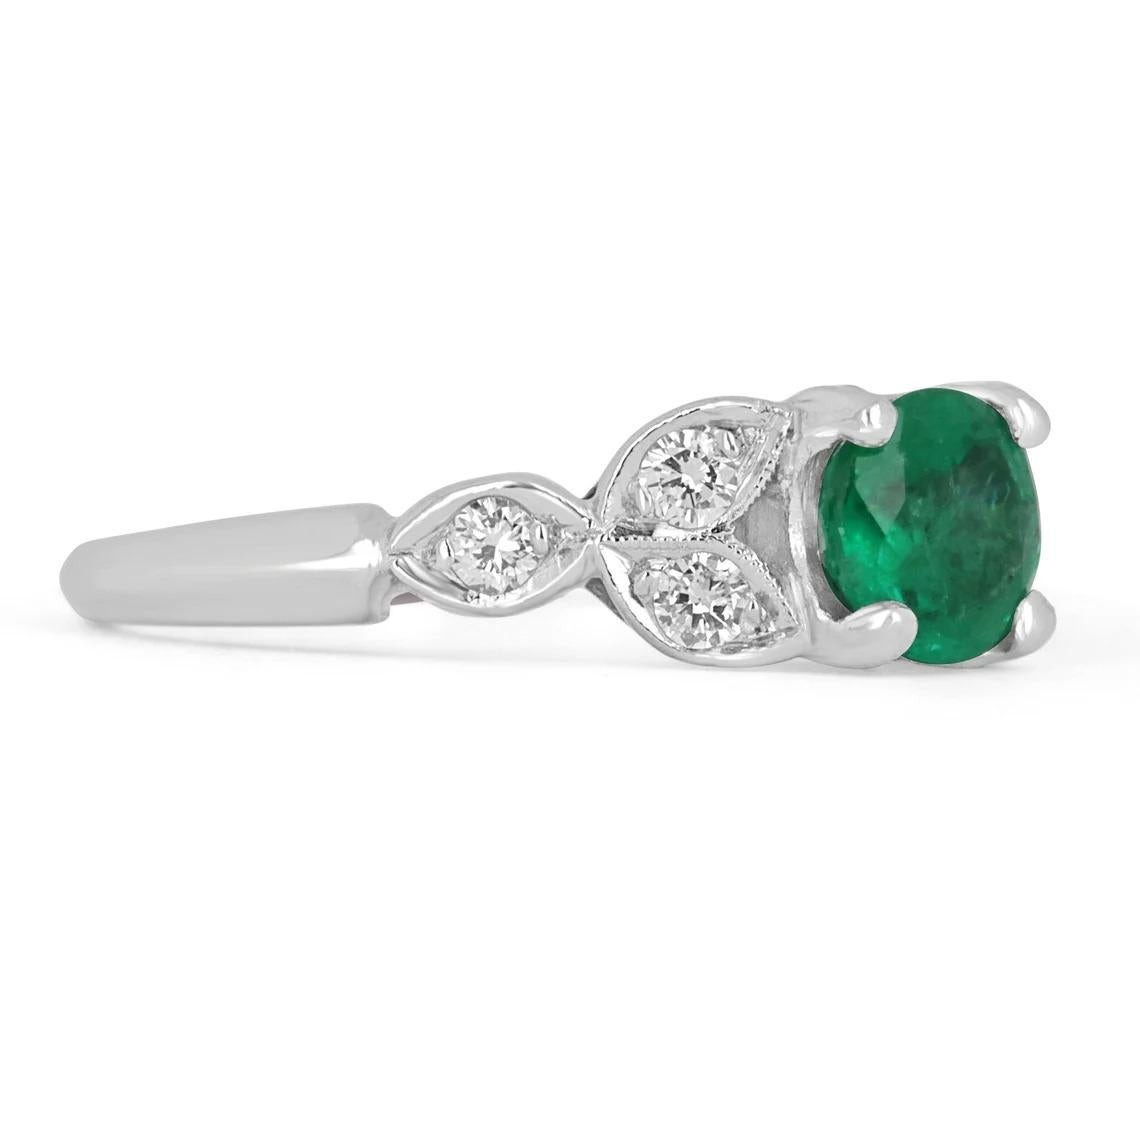 A unique emerald and diamond ring. The center stone features an 0.96-carat round cut Colombian emerald. The emerald displays beautiful bluish-green color and good eye clarity. The stone is accented by brilliant round diamonds going down the shank in